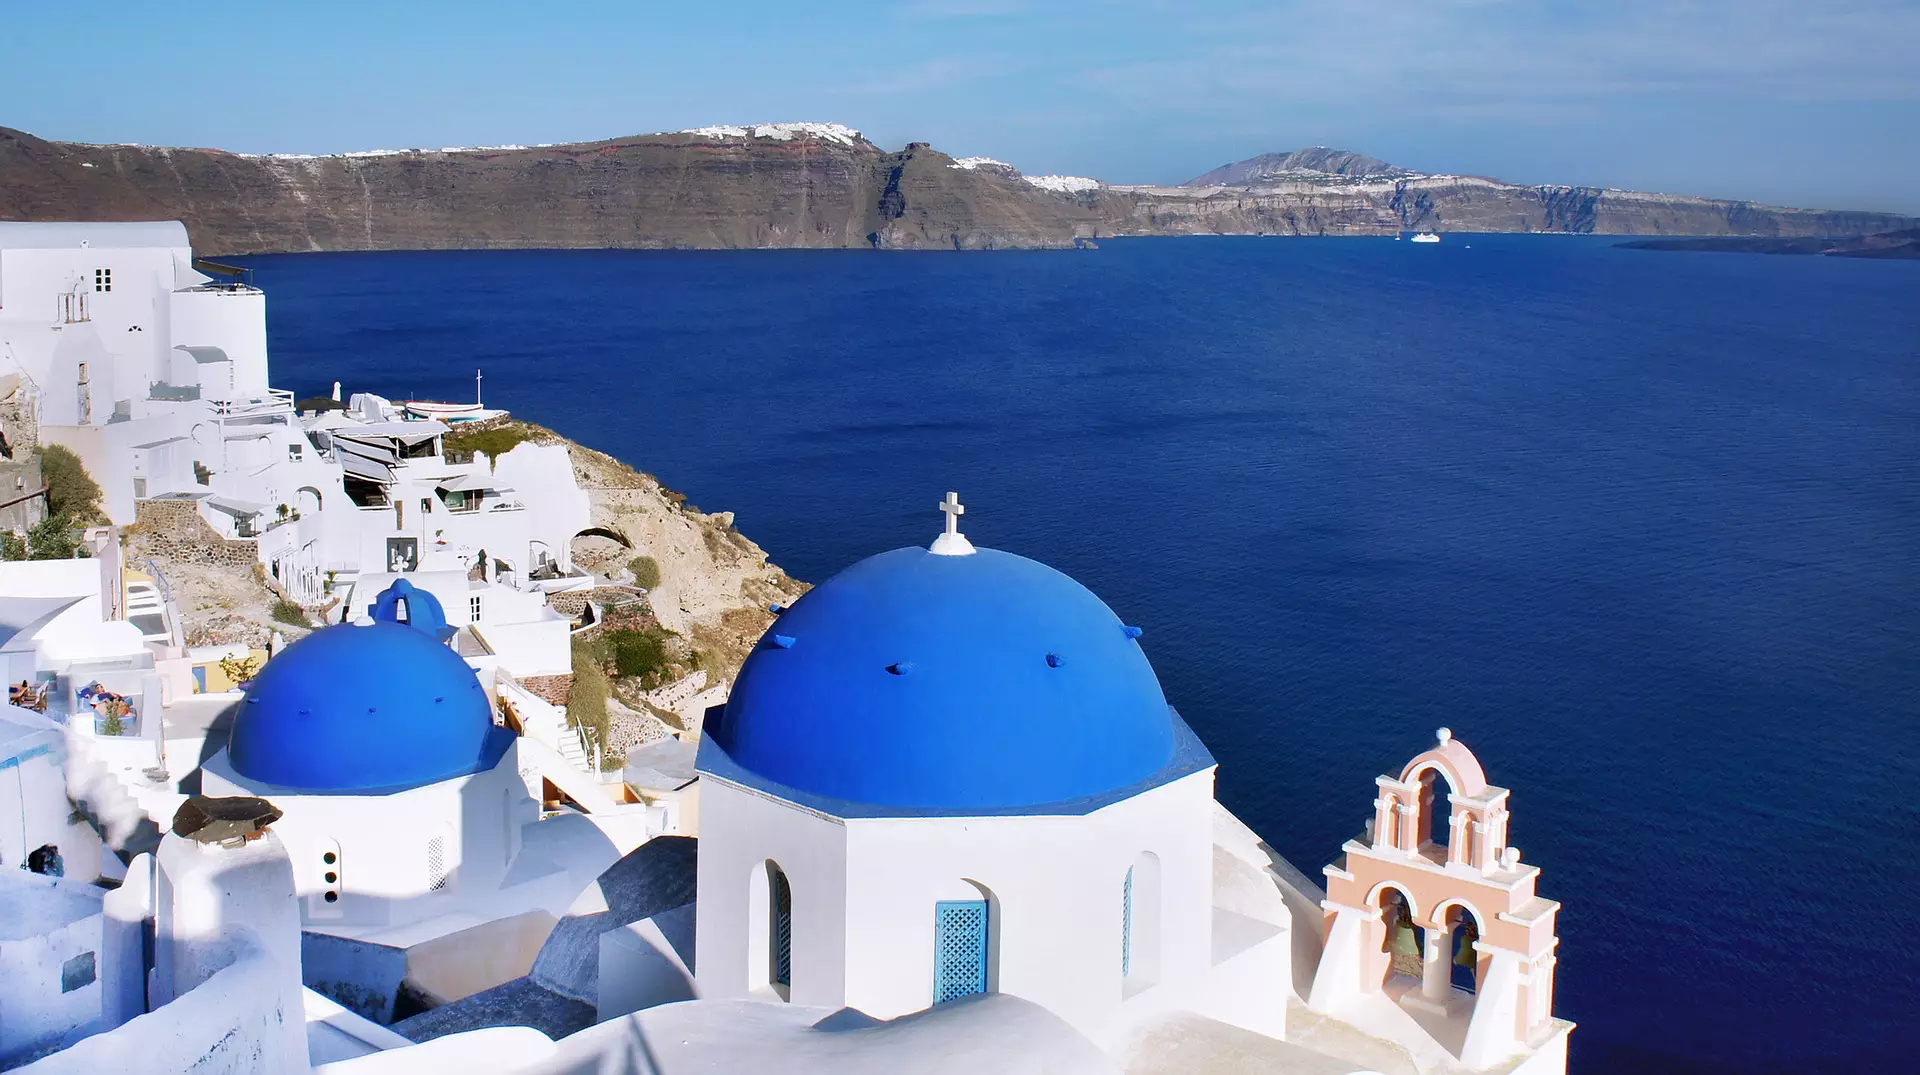 You Can Now Get Paid To Travel To The Greek Islands And Take Pictures